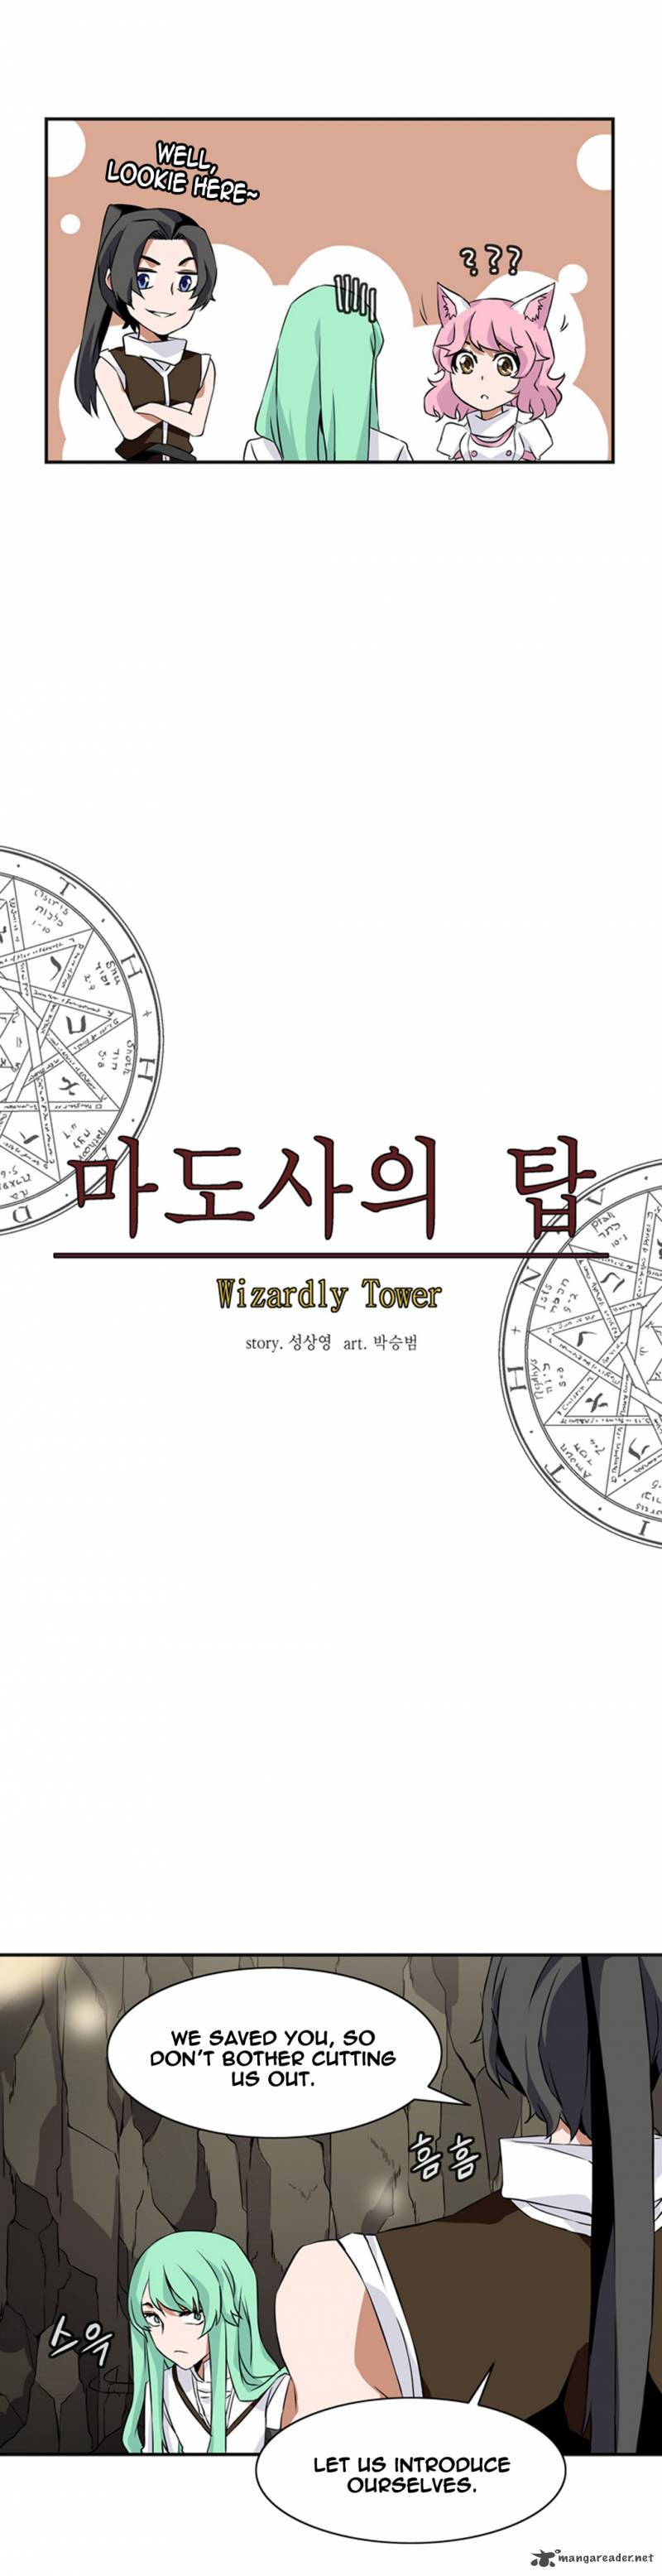 wizardly_tower_13_9